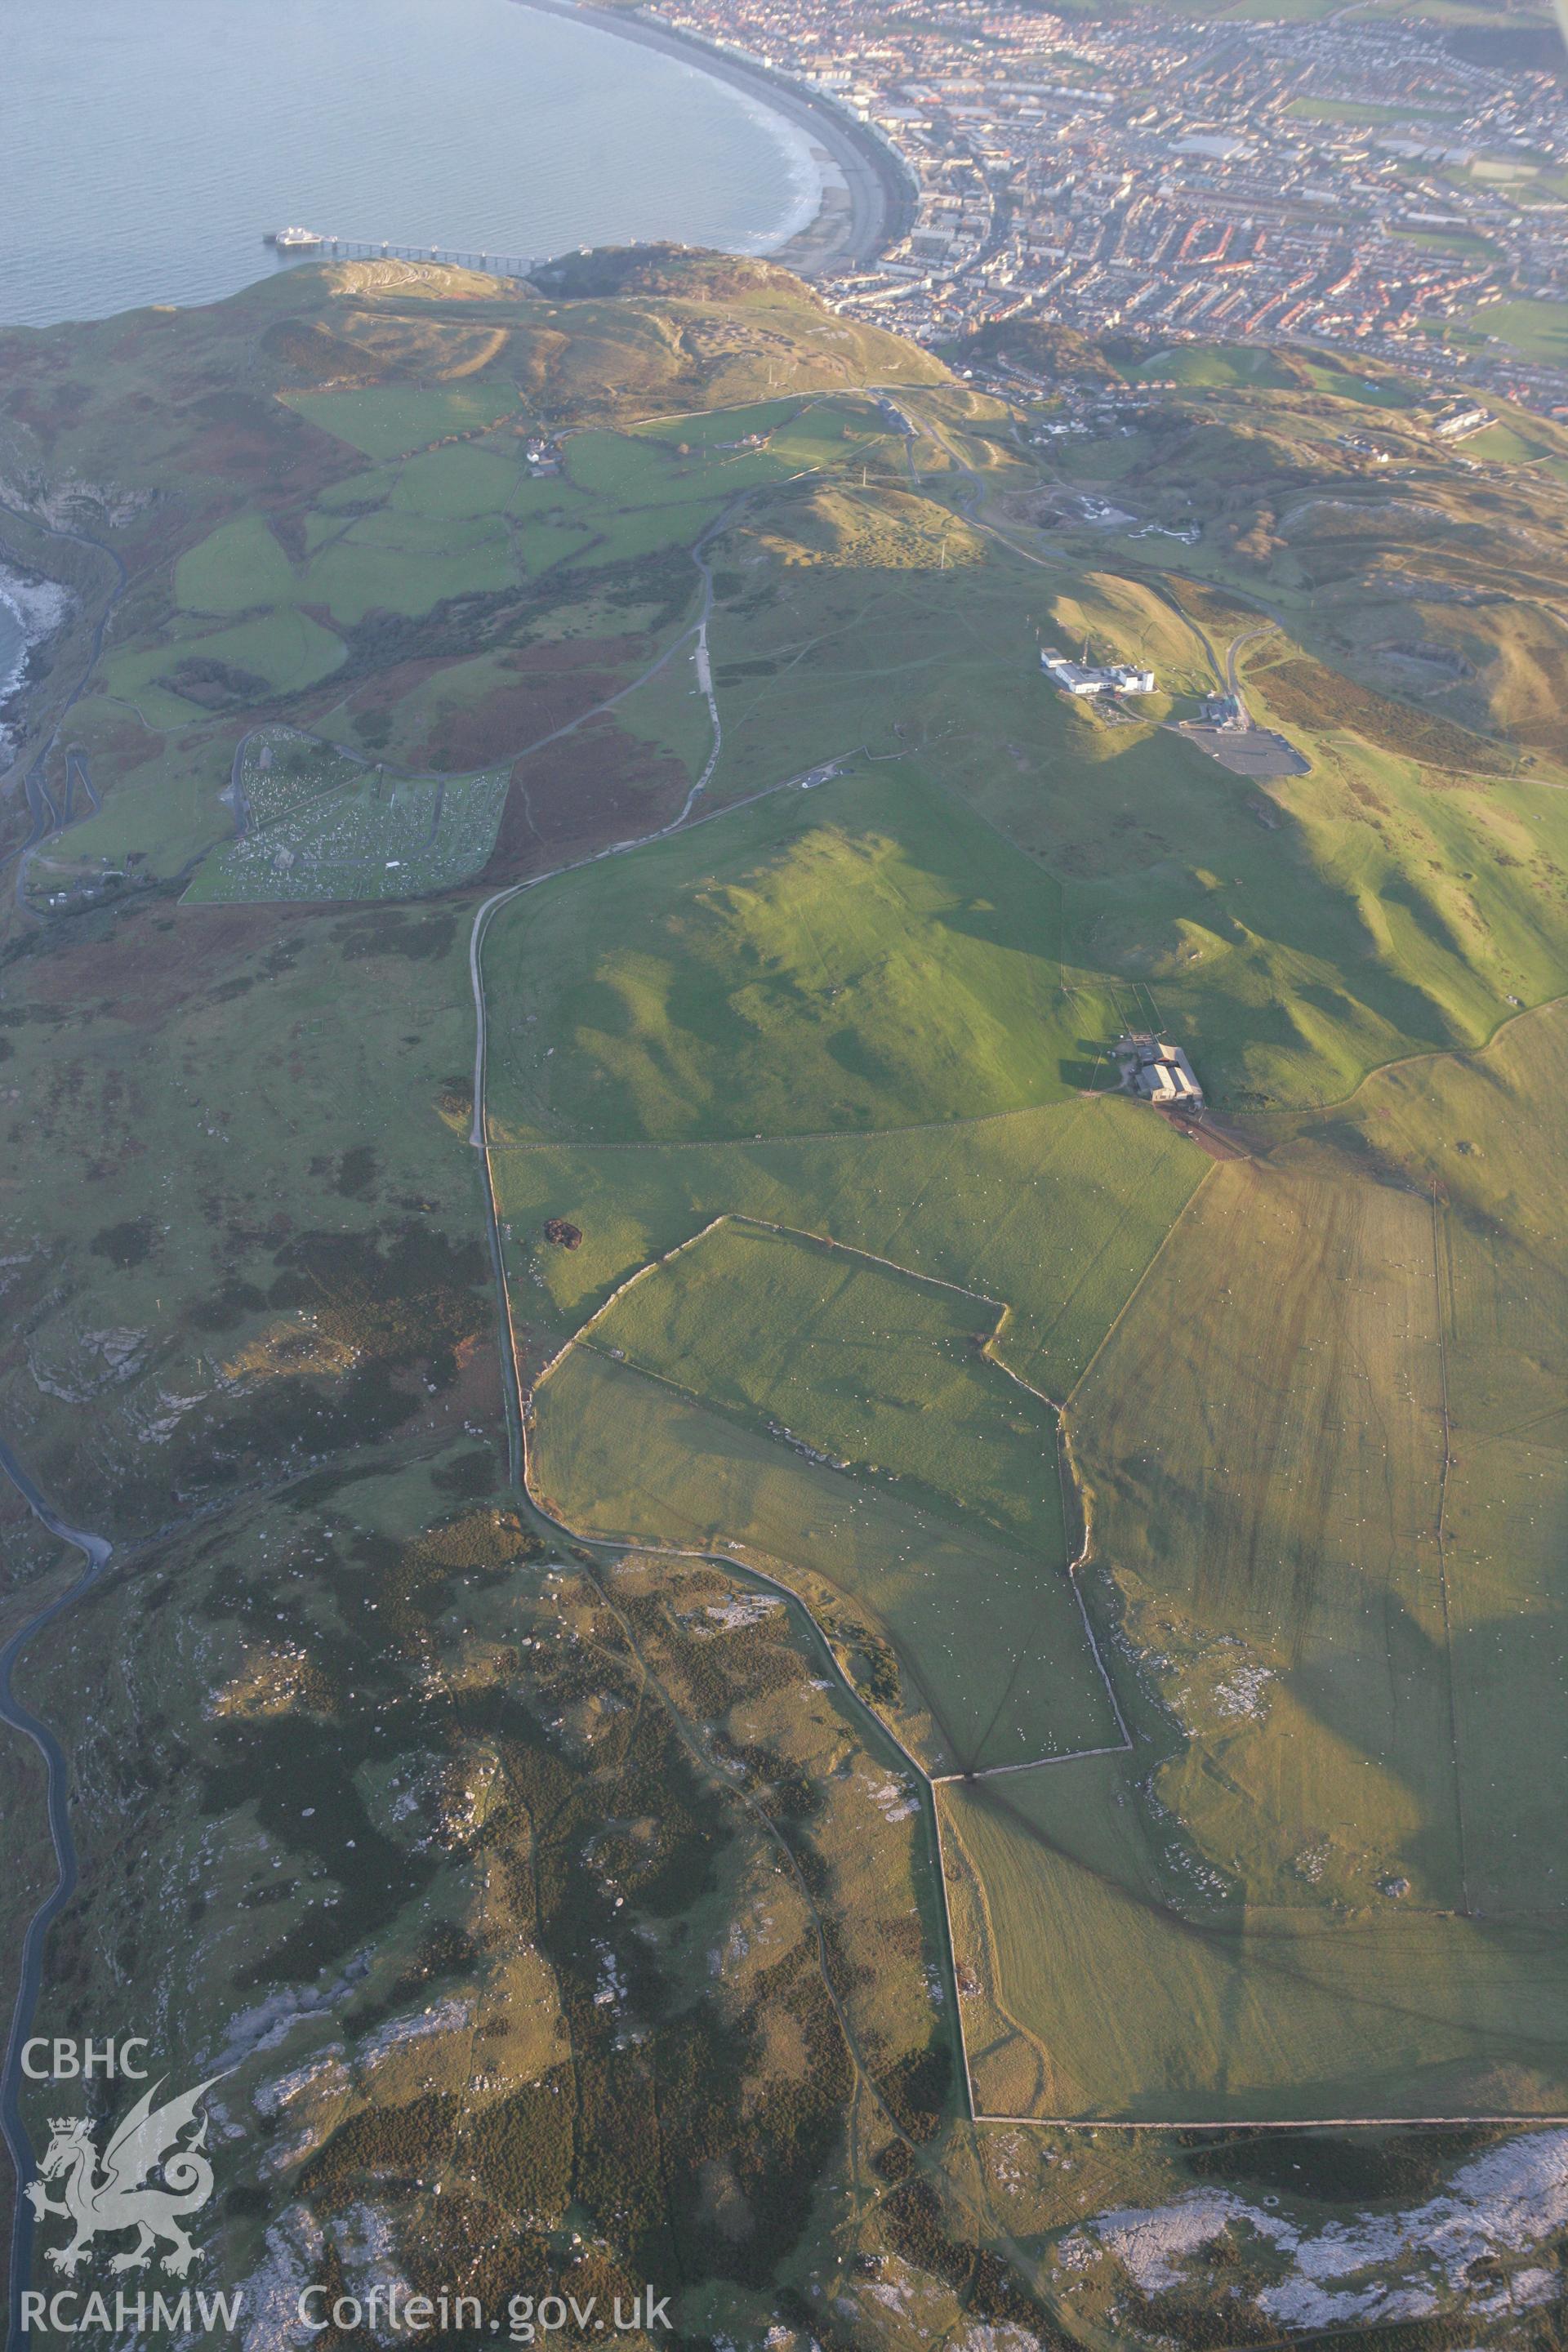 RCAHMW colour oblique photograph of Great Orme and fields to the north of Telegraph Station. Taken by Toby Driver on 20/12/2007.